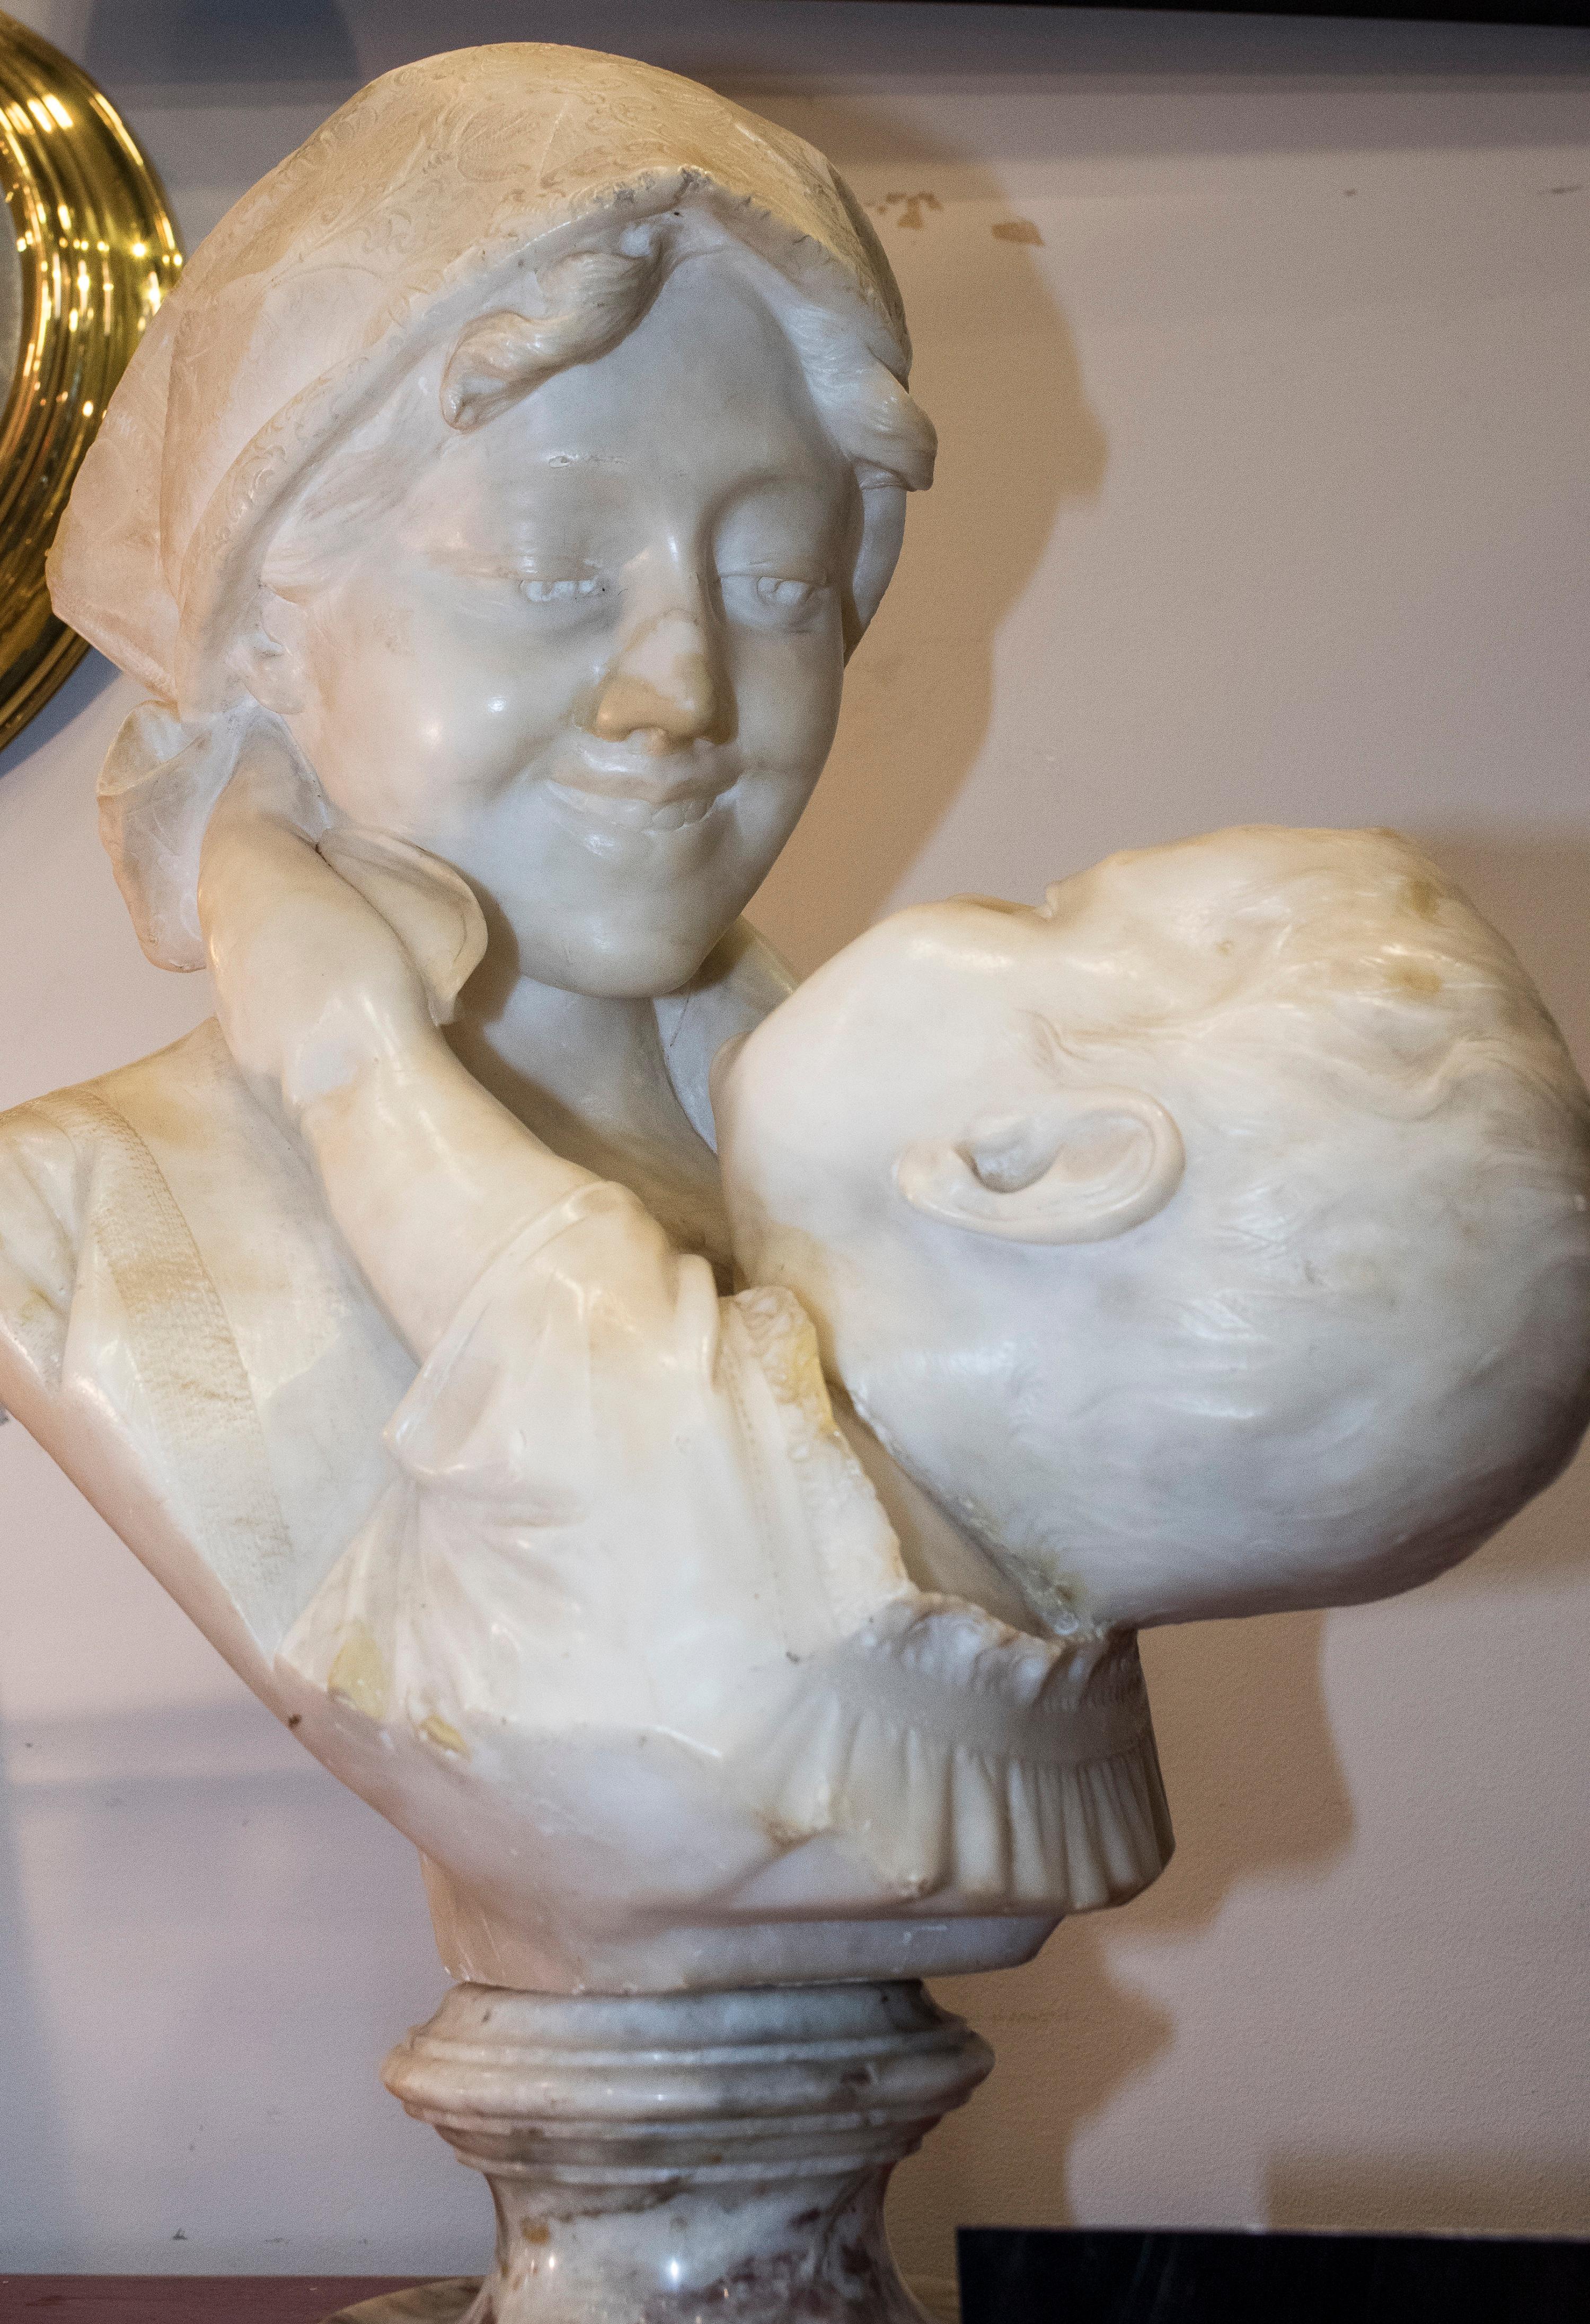 One of a kind circa 1900 sculpture in alabaster, signed by Ferdinand Vichi (Florencia 1875-1945), 